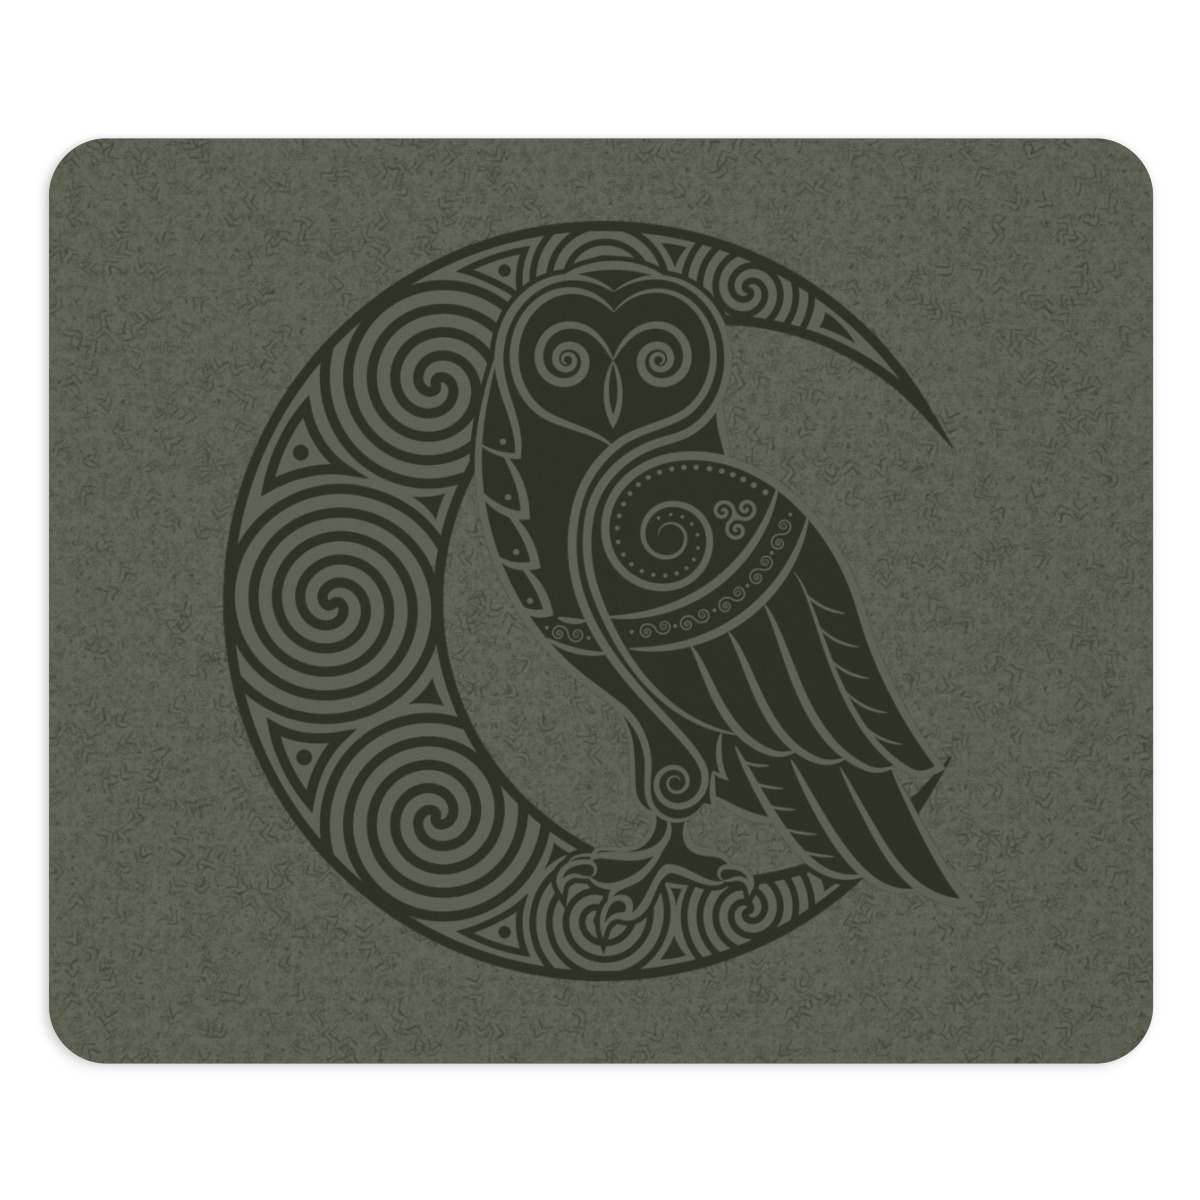 Green Owl Crescent Moon Mouse Pad